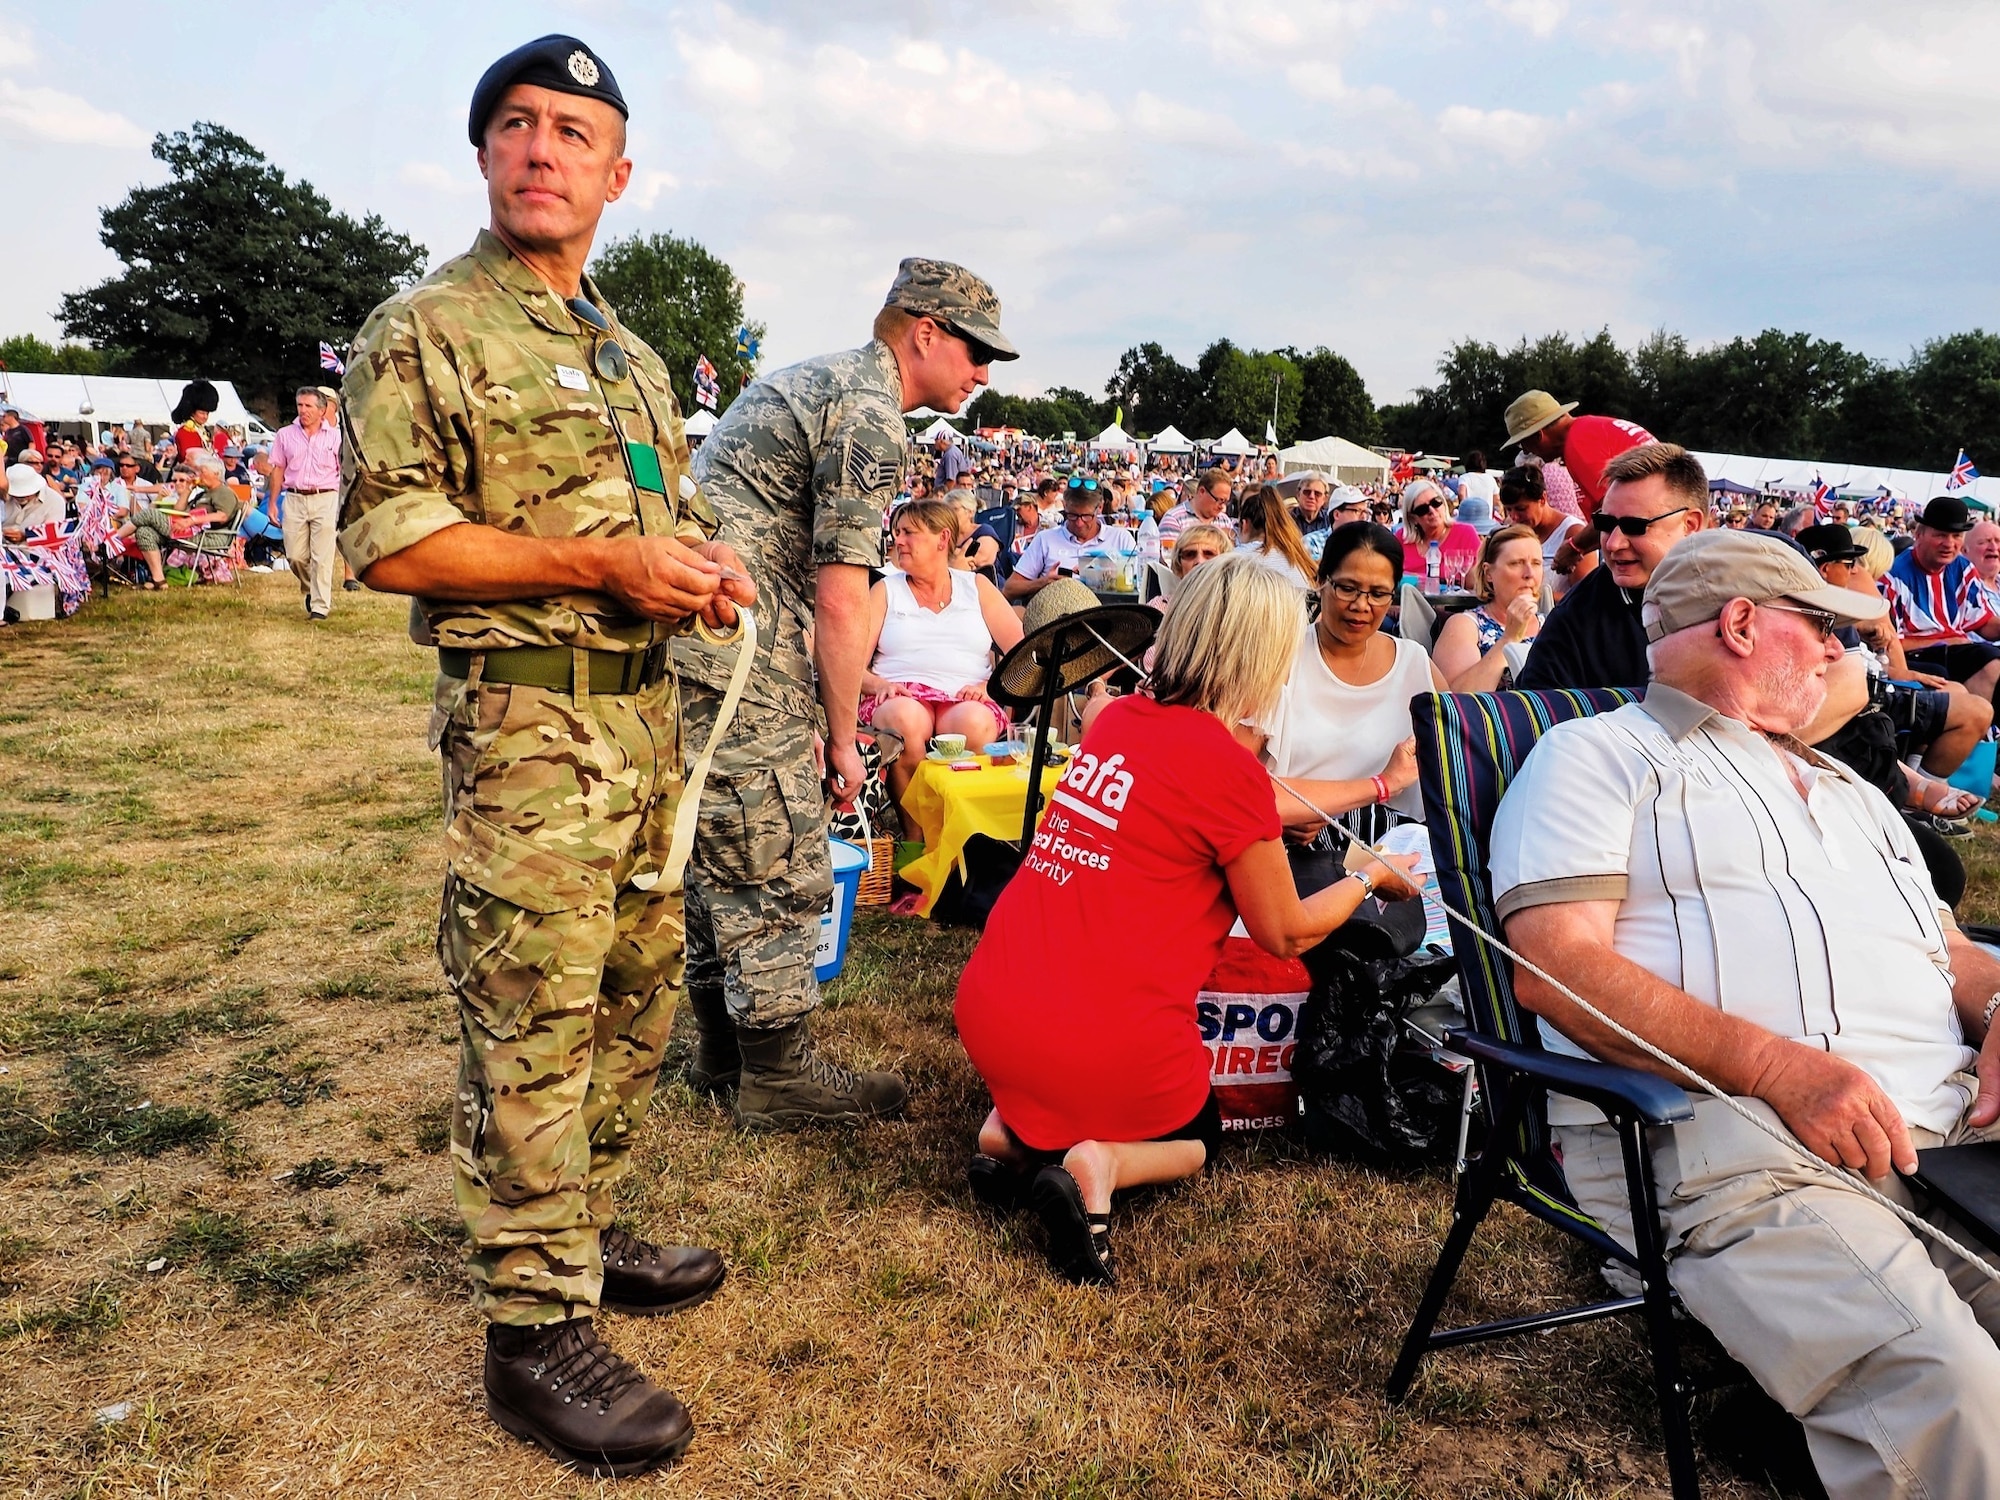 U.S. Air Force Staff Sgt. Jason Chipley (center), 145th Logistics Readiness Squadron, helps with collecting donations for a charity event during Battle Proms at Hatfield Park, Hatfield, United Kingdom, July 14, 2018. The Military Reserve Exchange Program not only allows military members to learn and exchange ideas about their respective career fields, but it also provides the opportunity to be immersed in the host country’s culture.